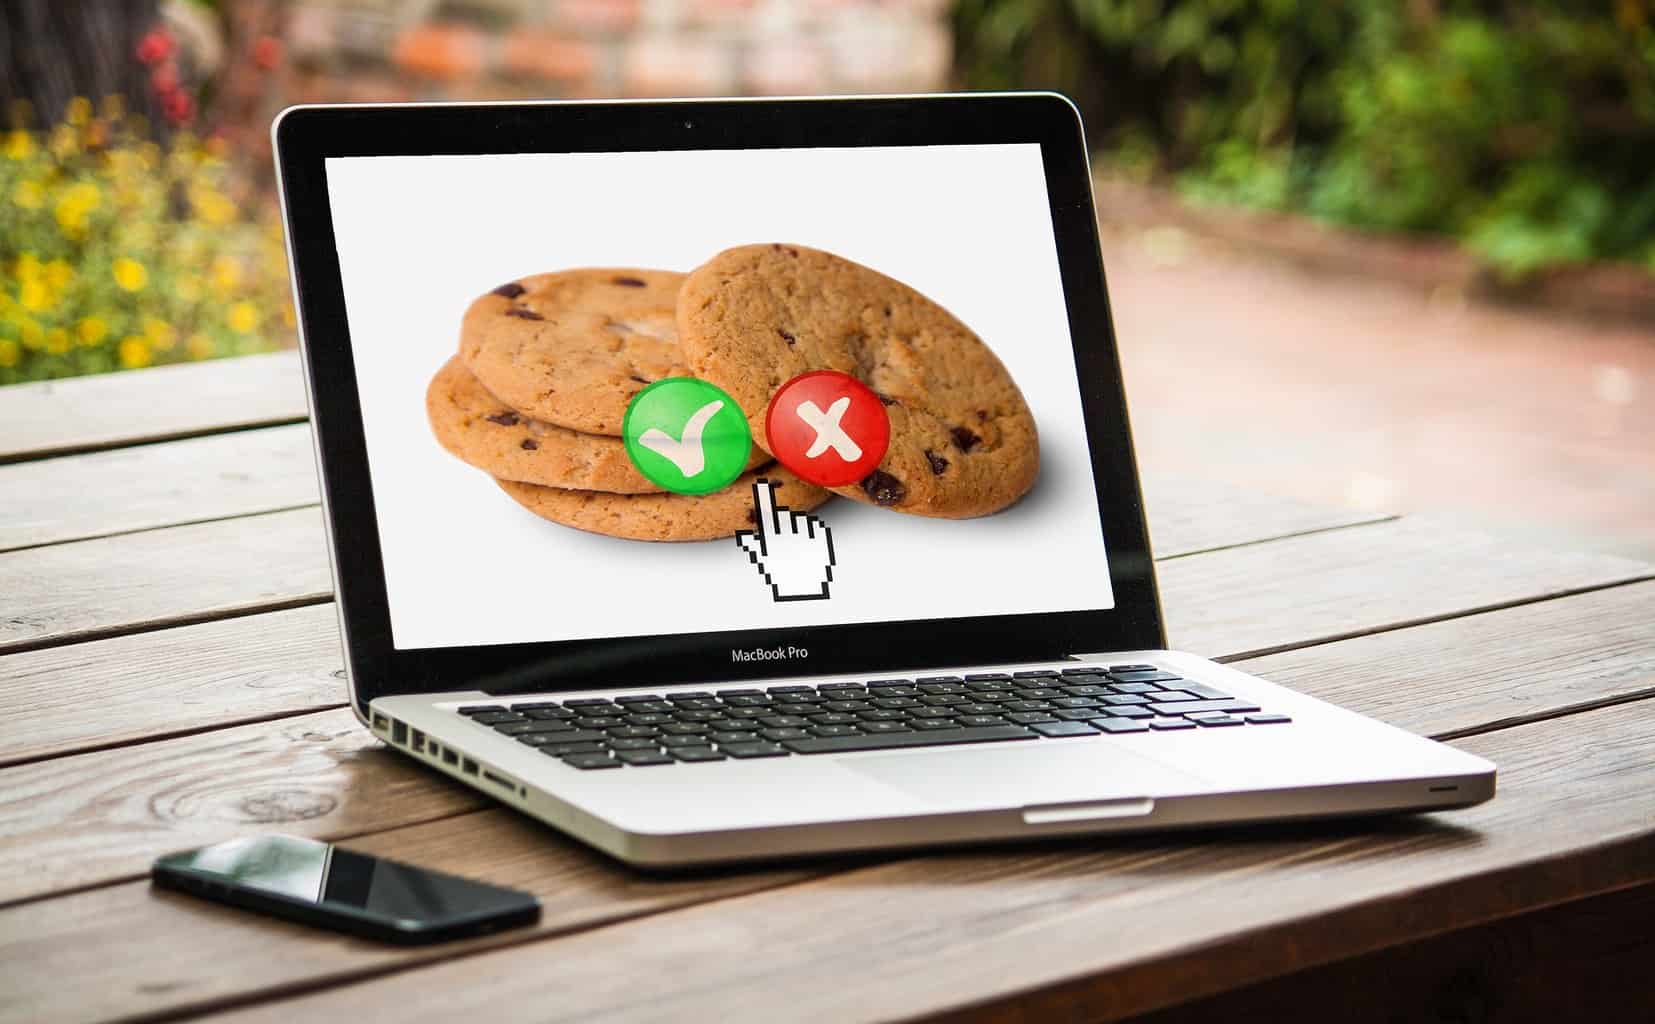 Browser cookie duration